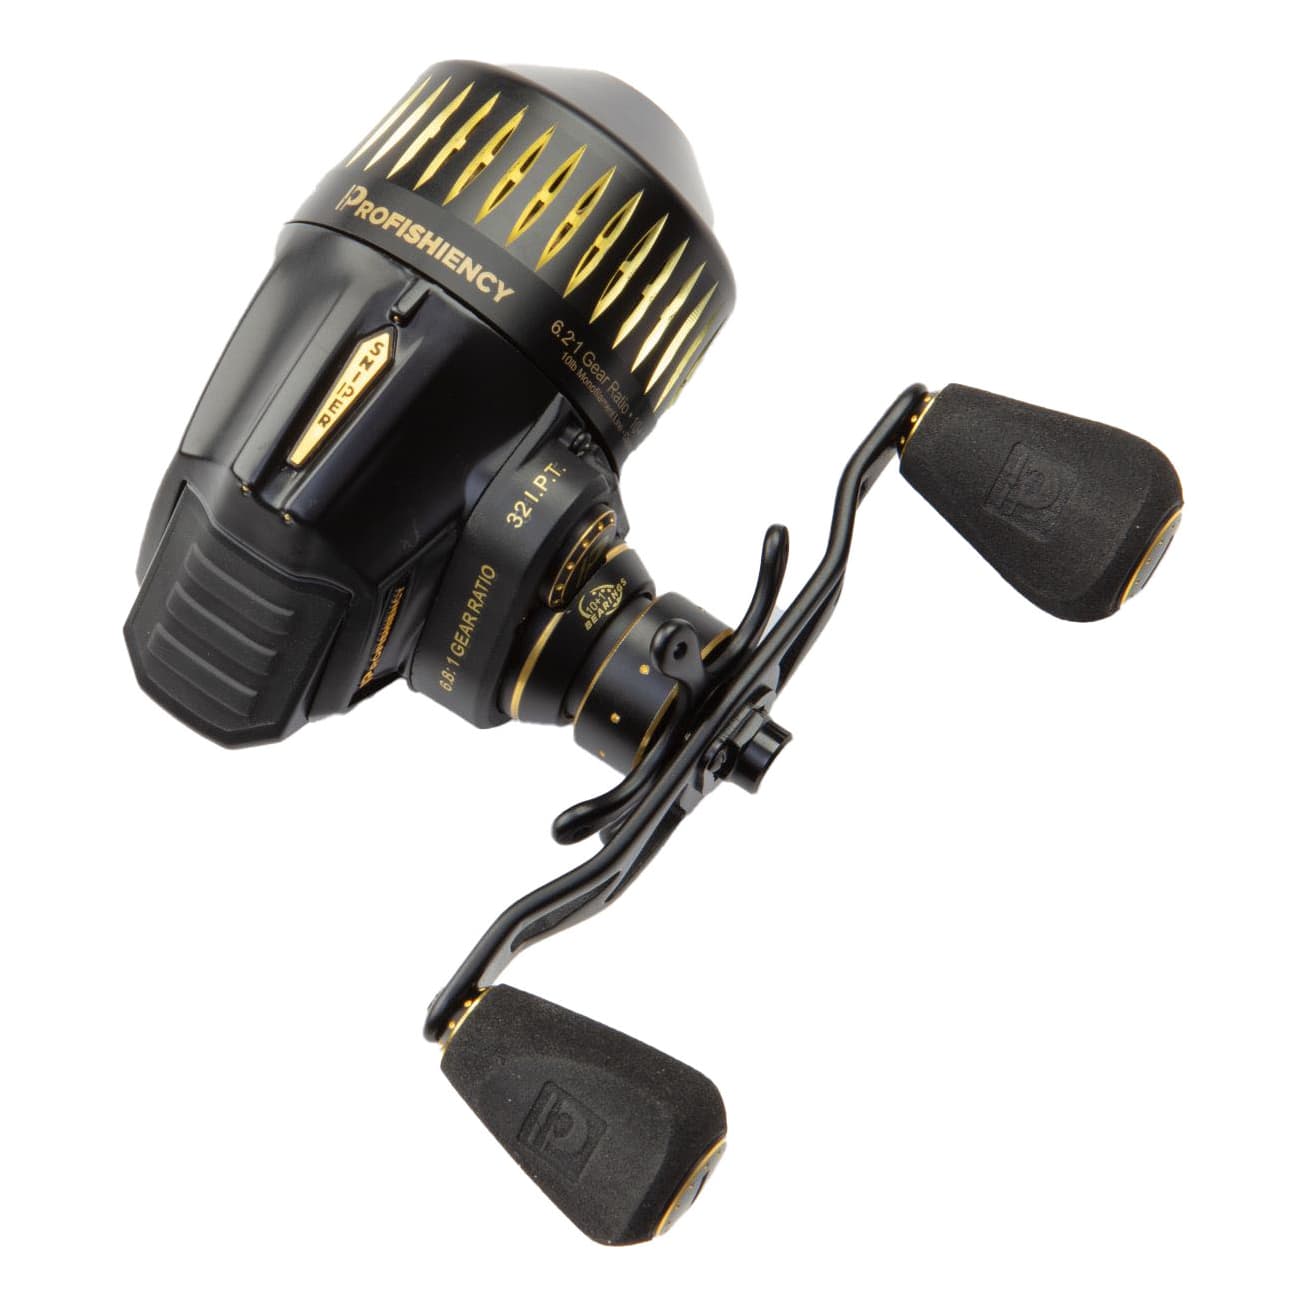 Top 10 Spincast Reels for 2022 - Bass Fishing with an Easy Fishing